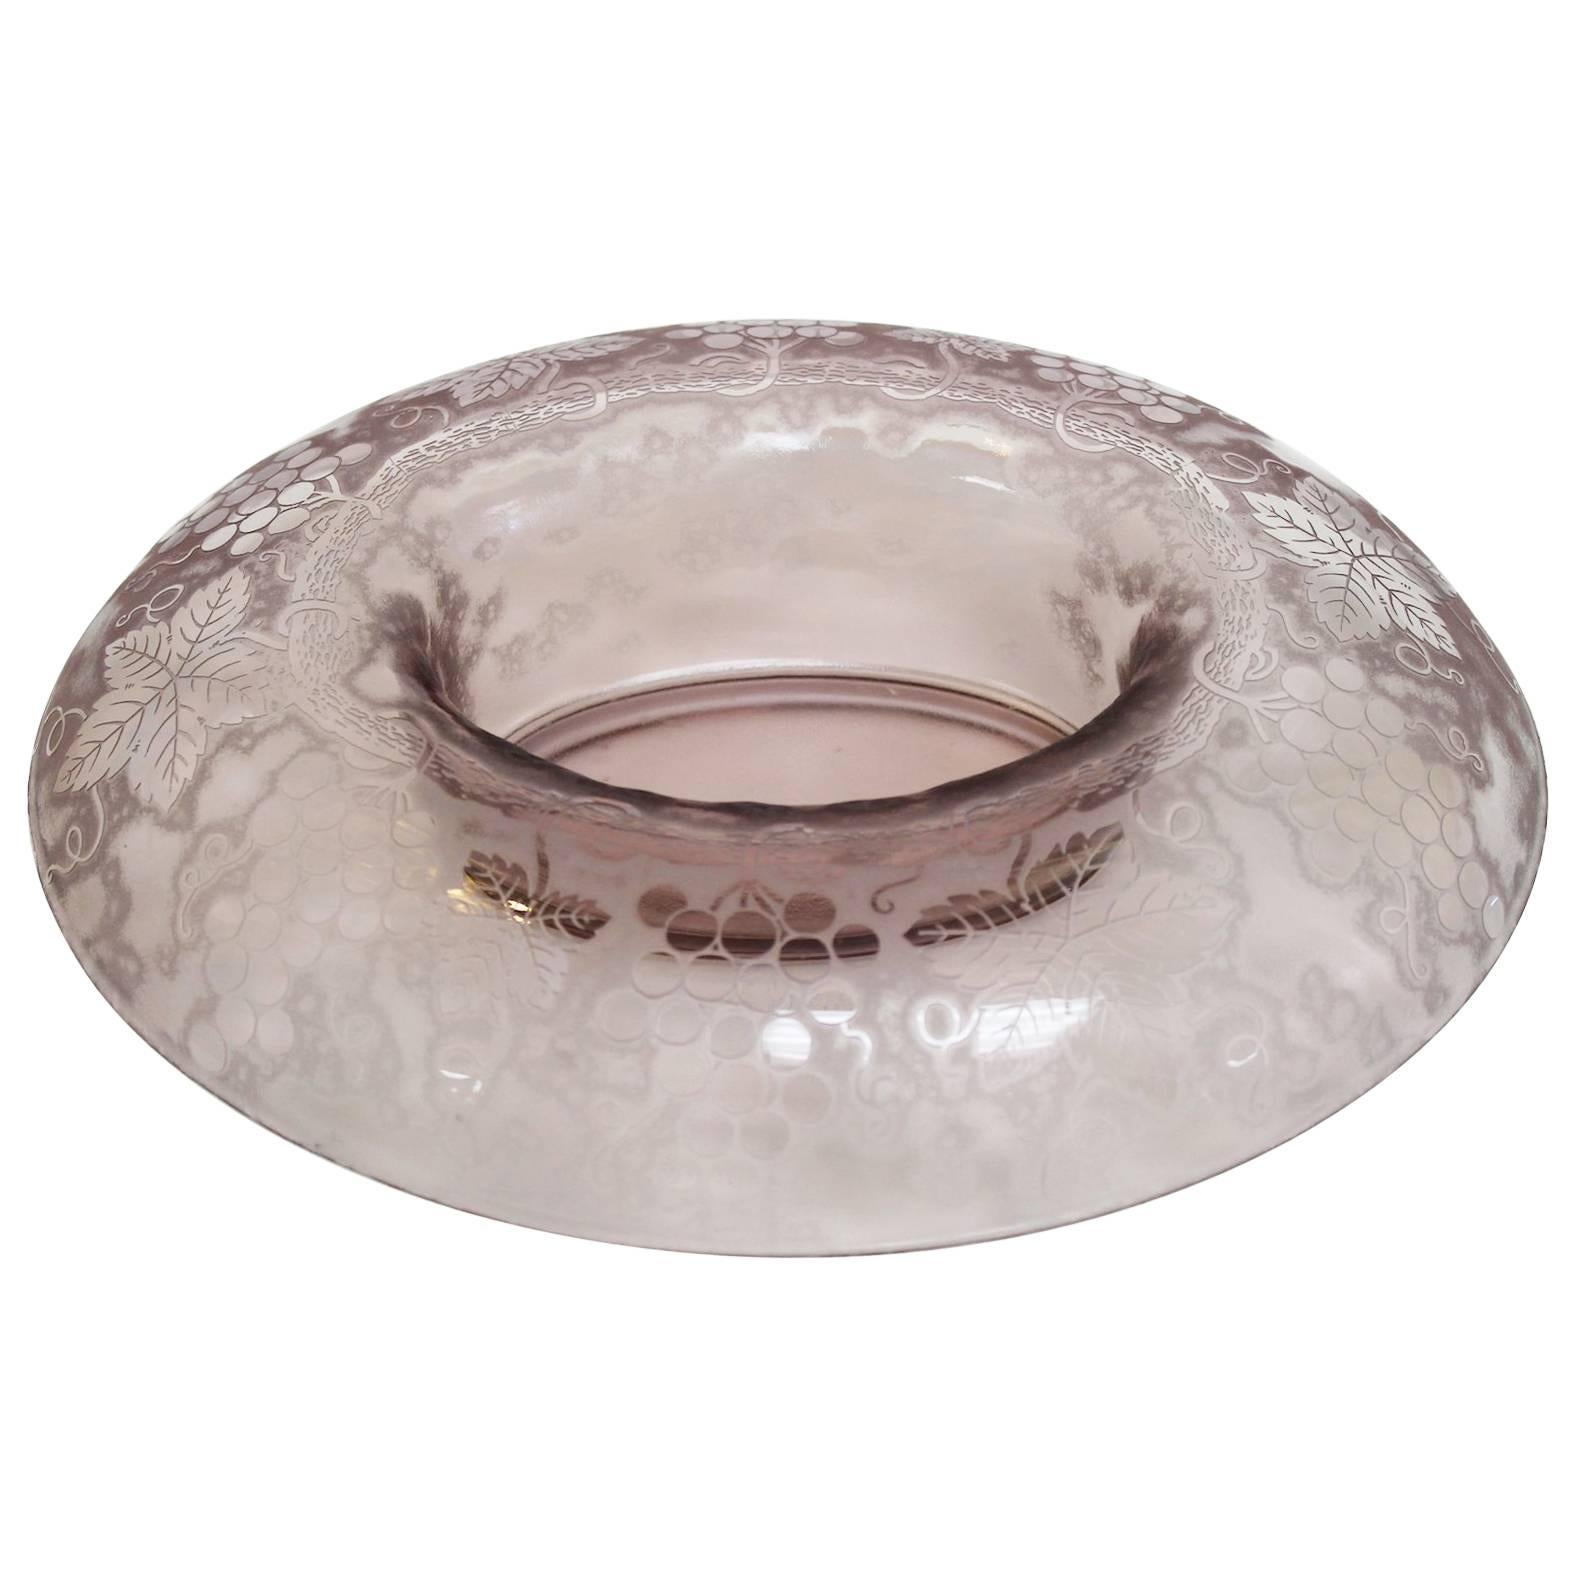 Etched Grape Serving Bowl For Sale